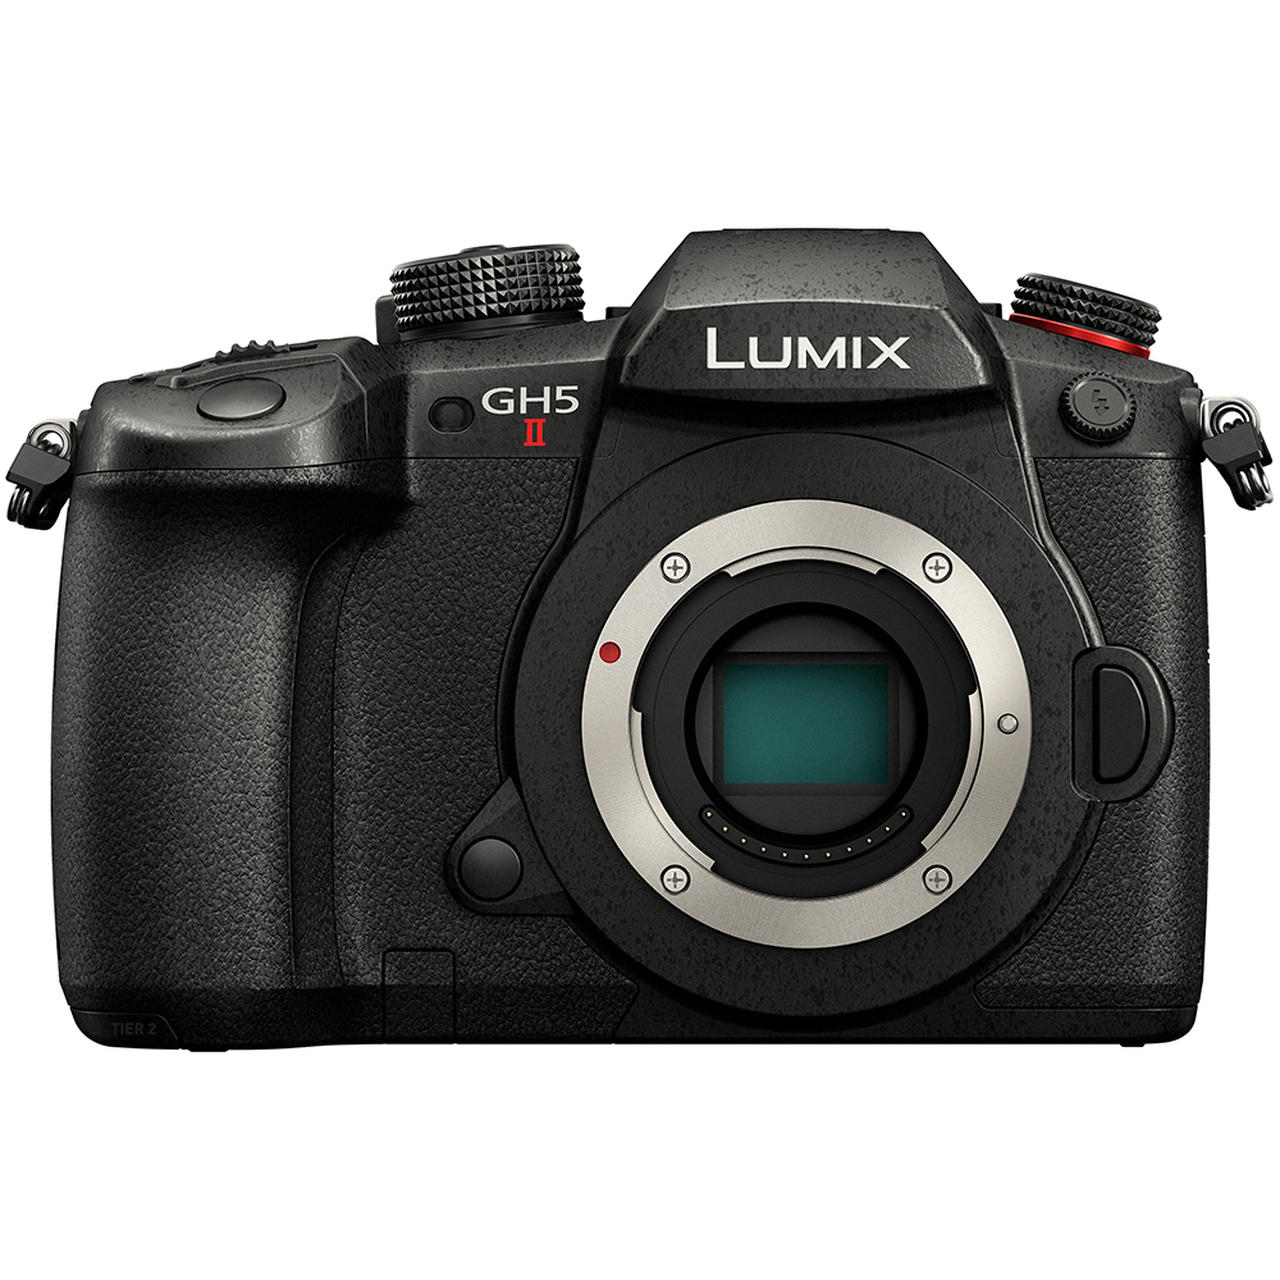 Kenmore Camera: PANASONIC GH5 II M2 BODY and 12-60MM F2.8-4.0 KIT for $1,498.00 and $2,098.00 respectively $1498